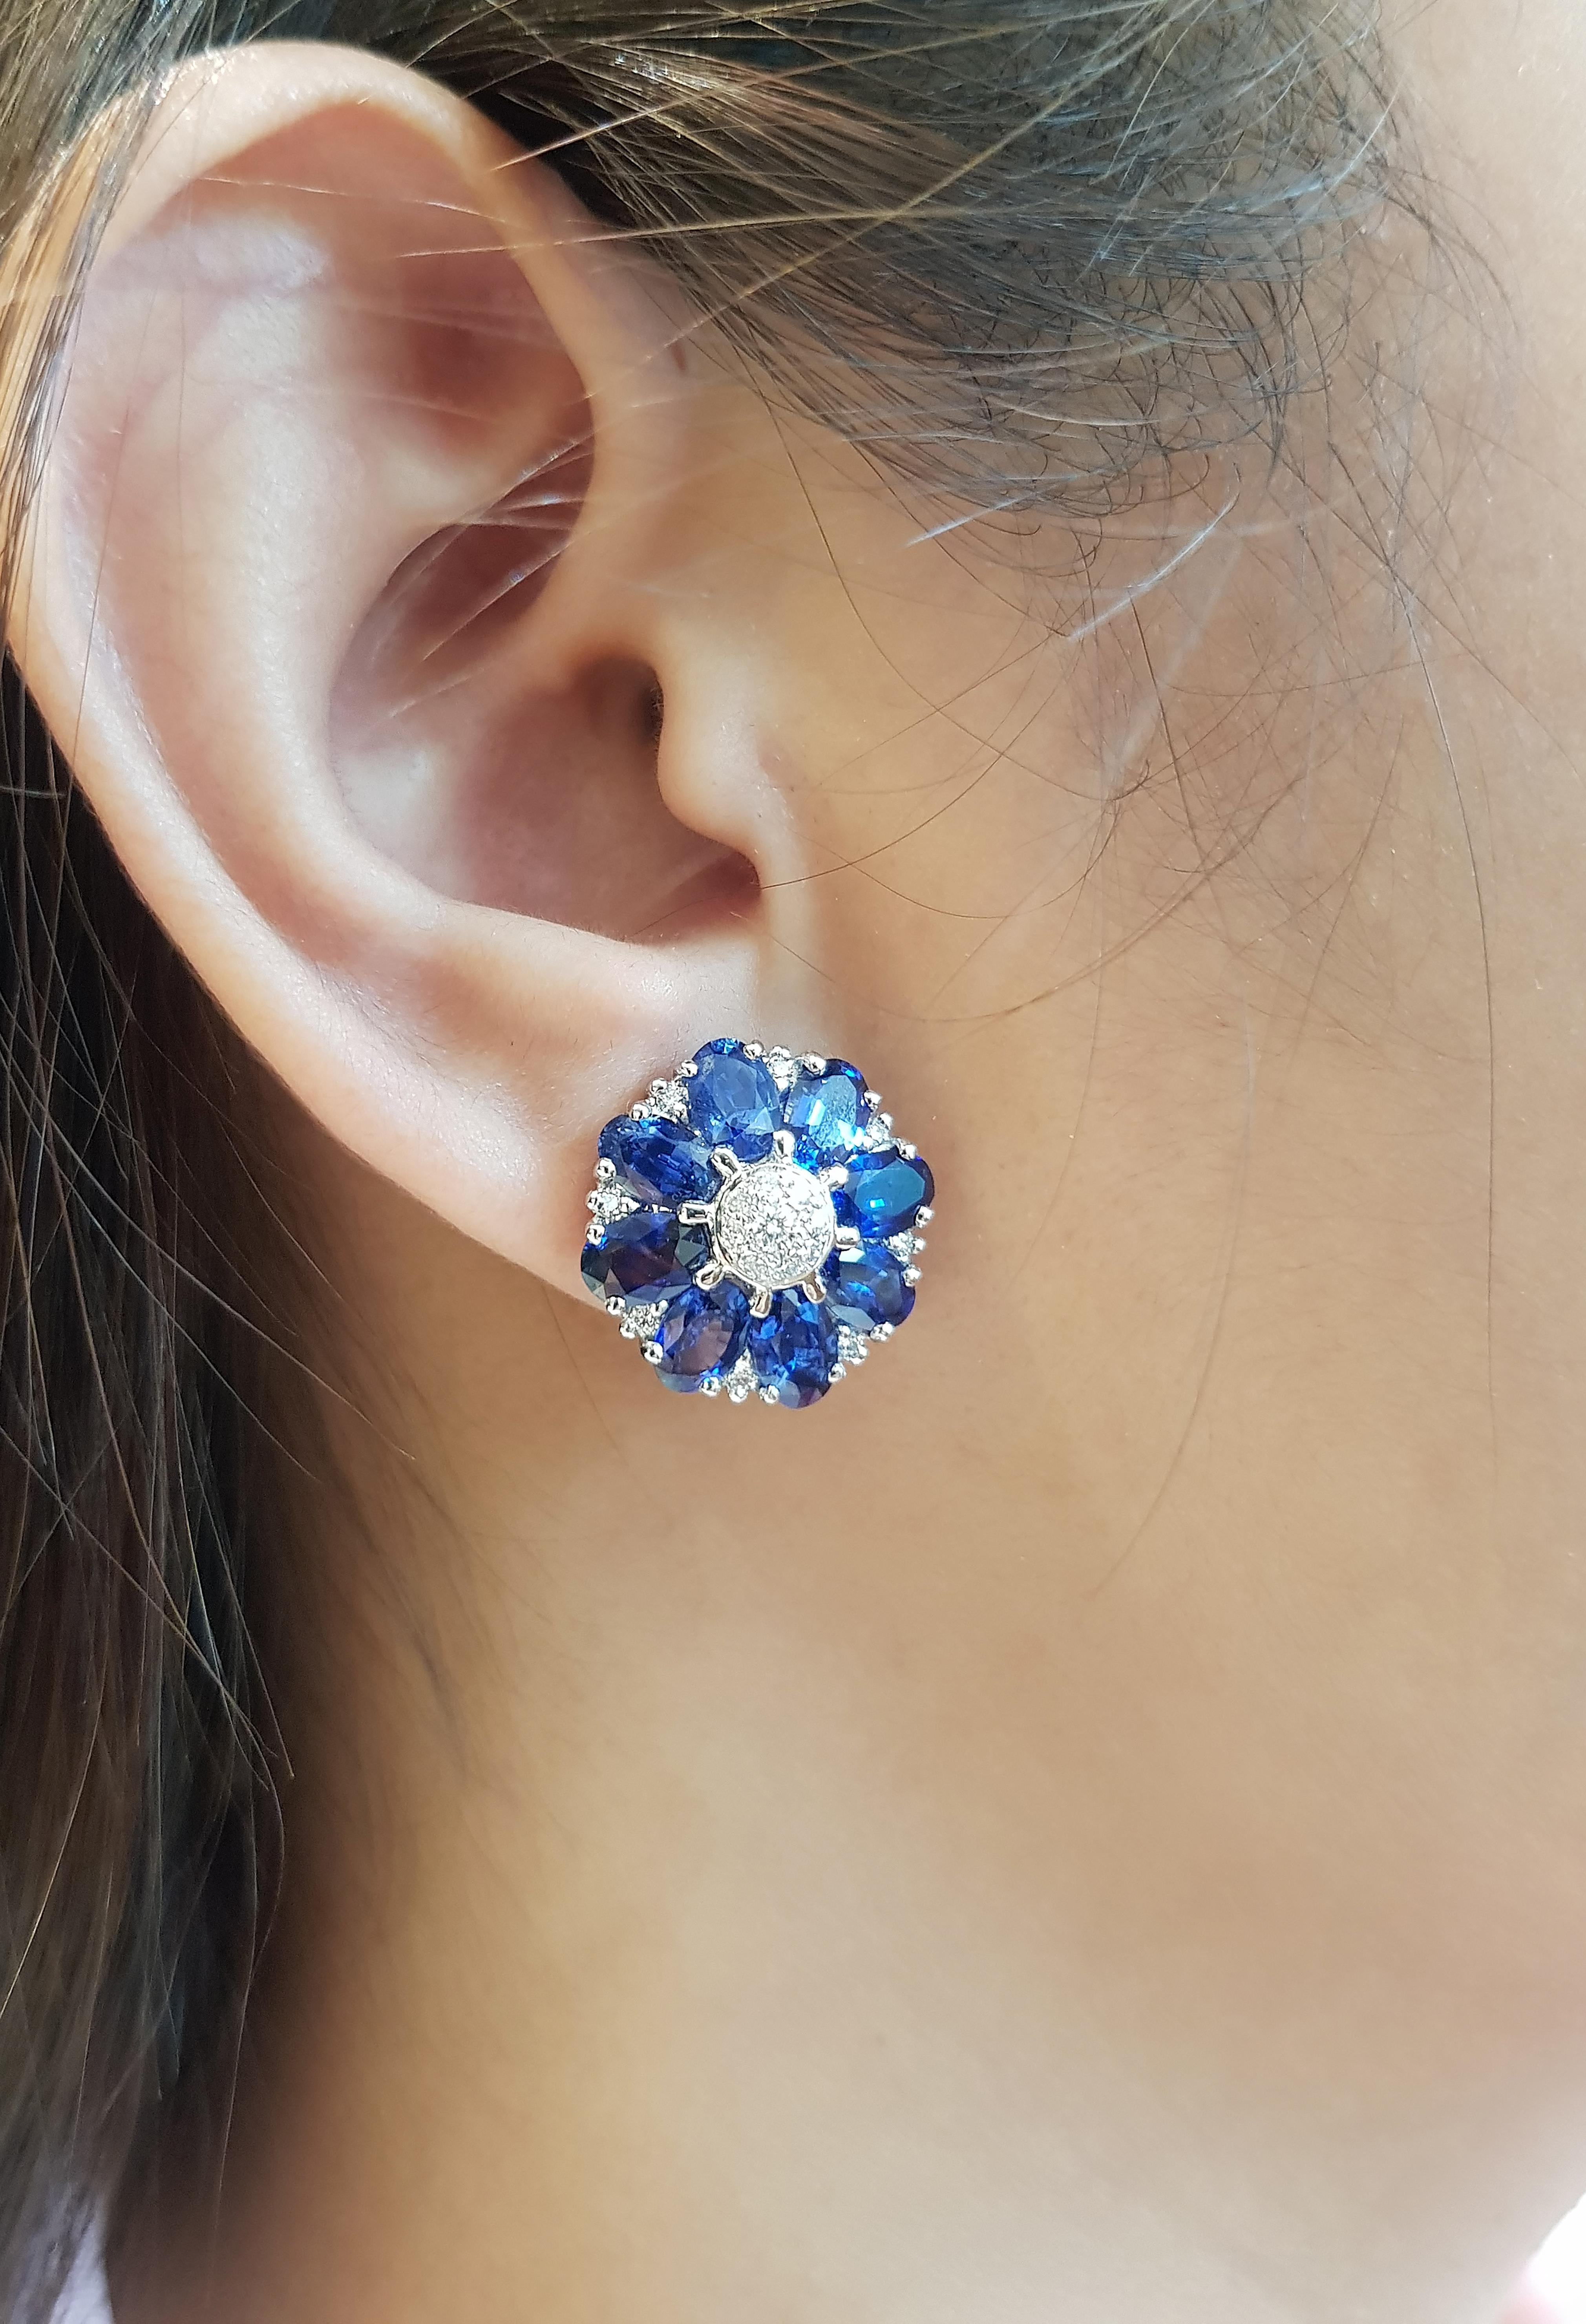 Blue Sapphire 8.30 carats with Diamond 0.39 carats Earrings set in 18 Karat White Gold Settings

Width:  1.7 cm 
Length: 1.7 cm
Total Weight: 13.85 grams

